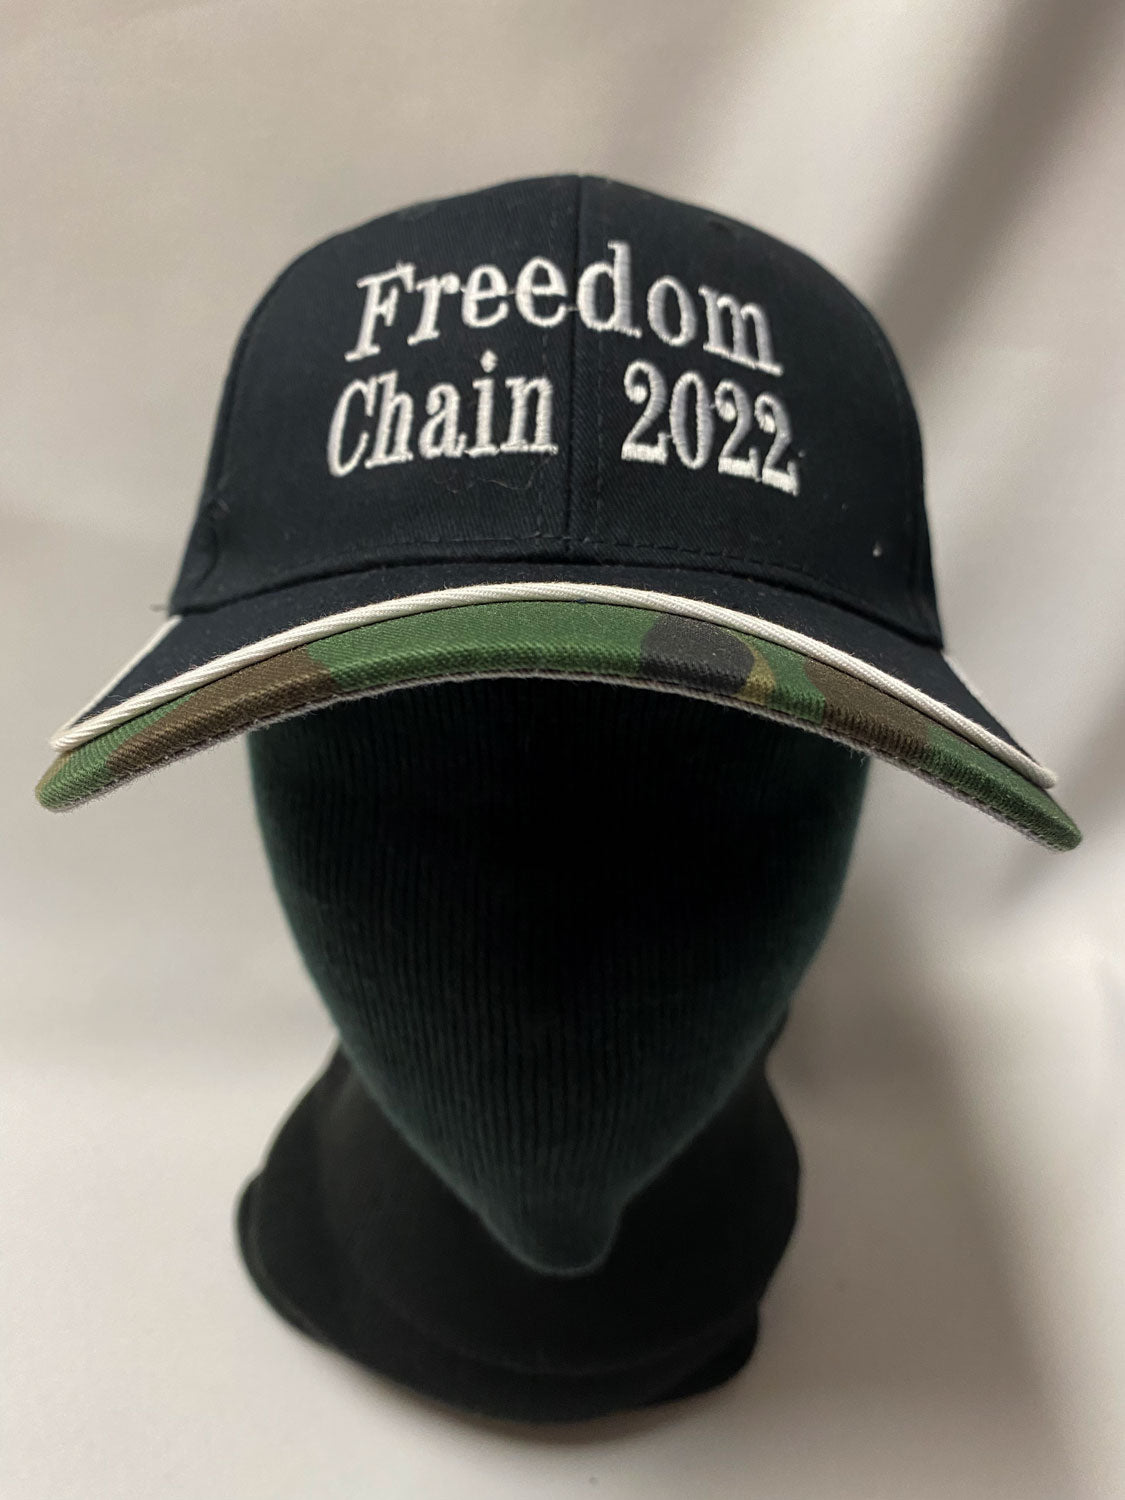 BALL CAP FREEDOM CHAIN 2022 - white embroidery on black with camouflage brim accent